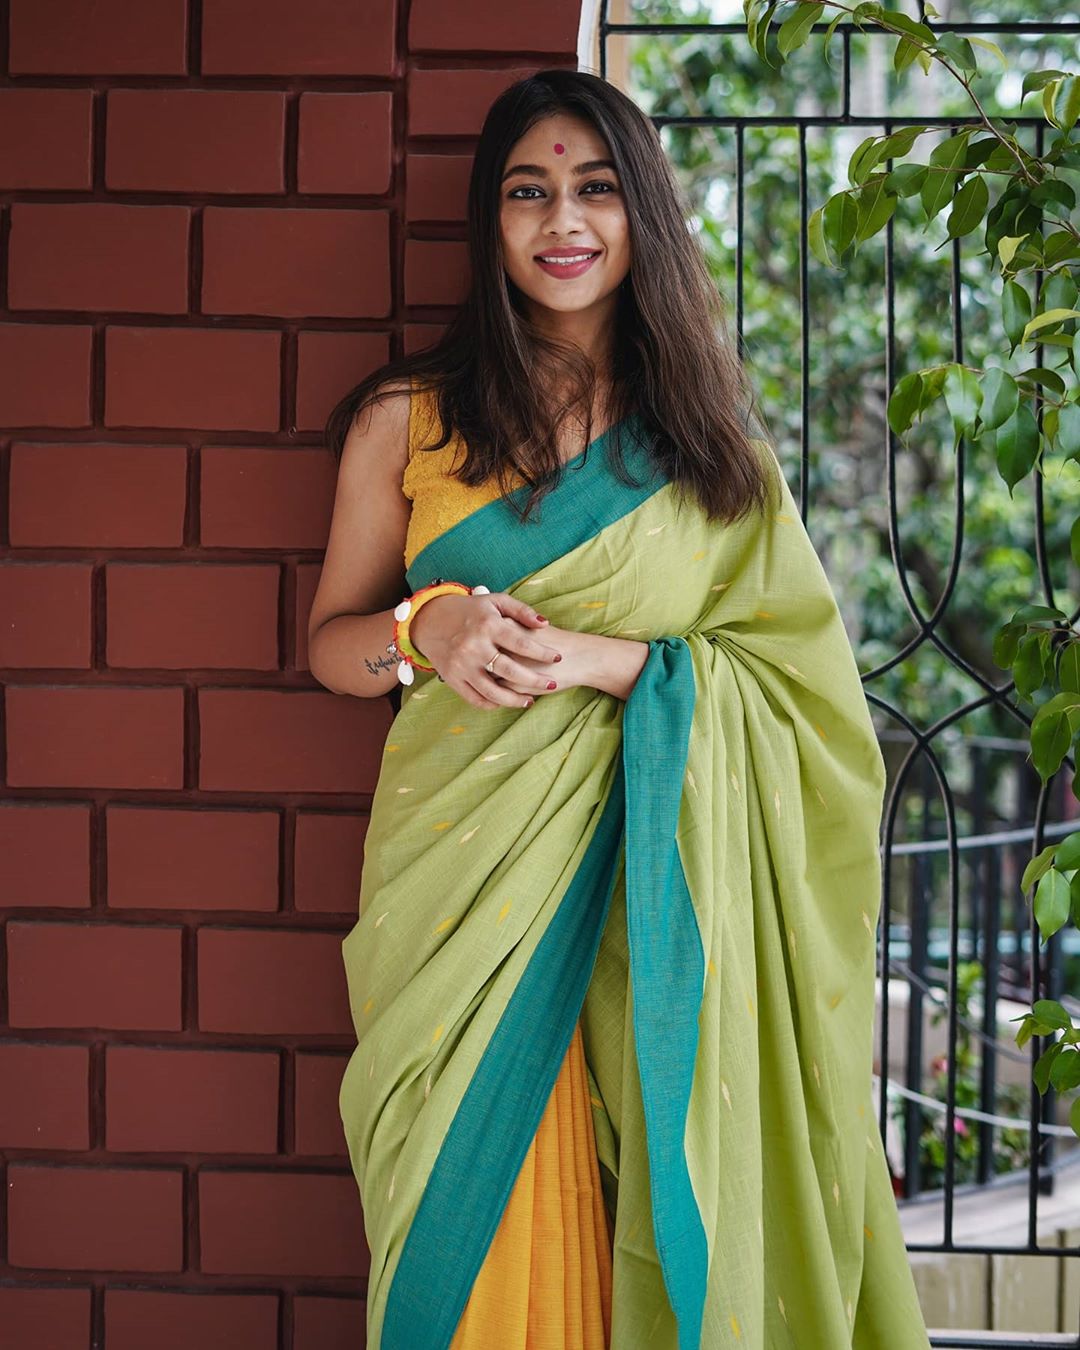 Find The Latest Trending Handloom Sarees Here!! • Keep Me Stylish